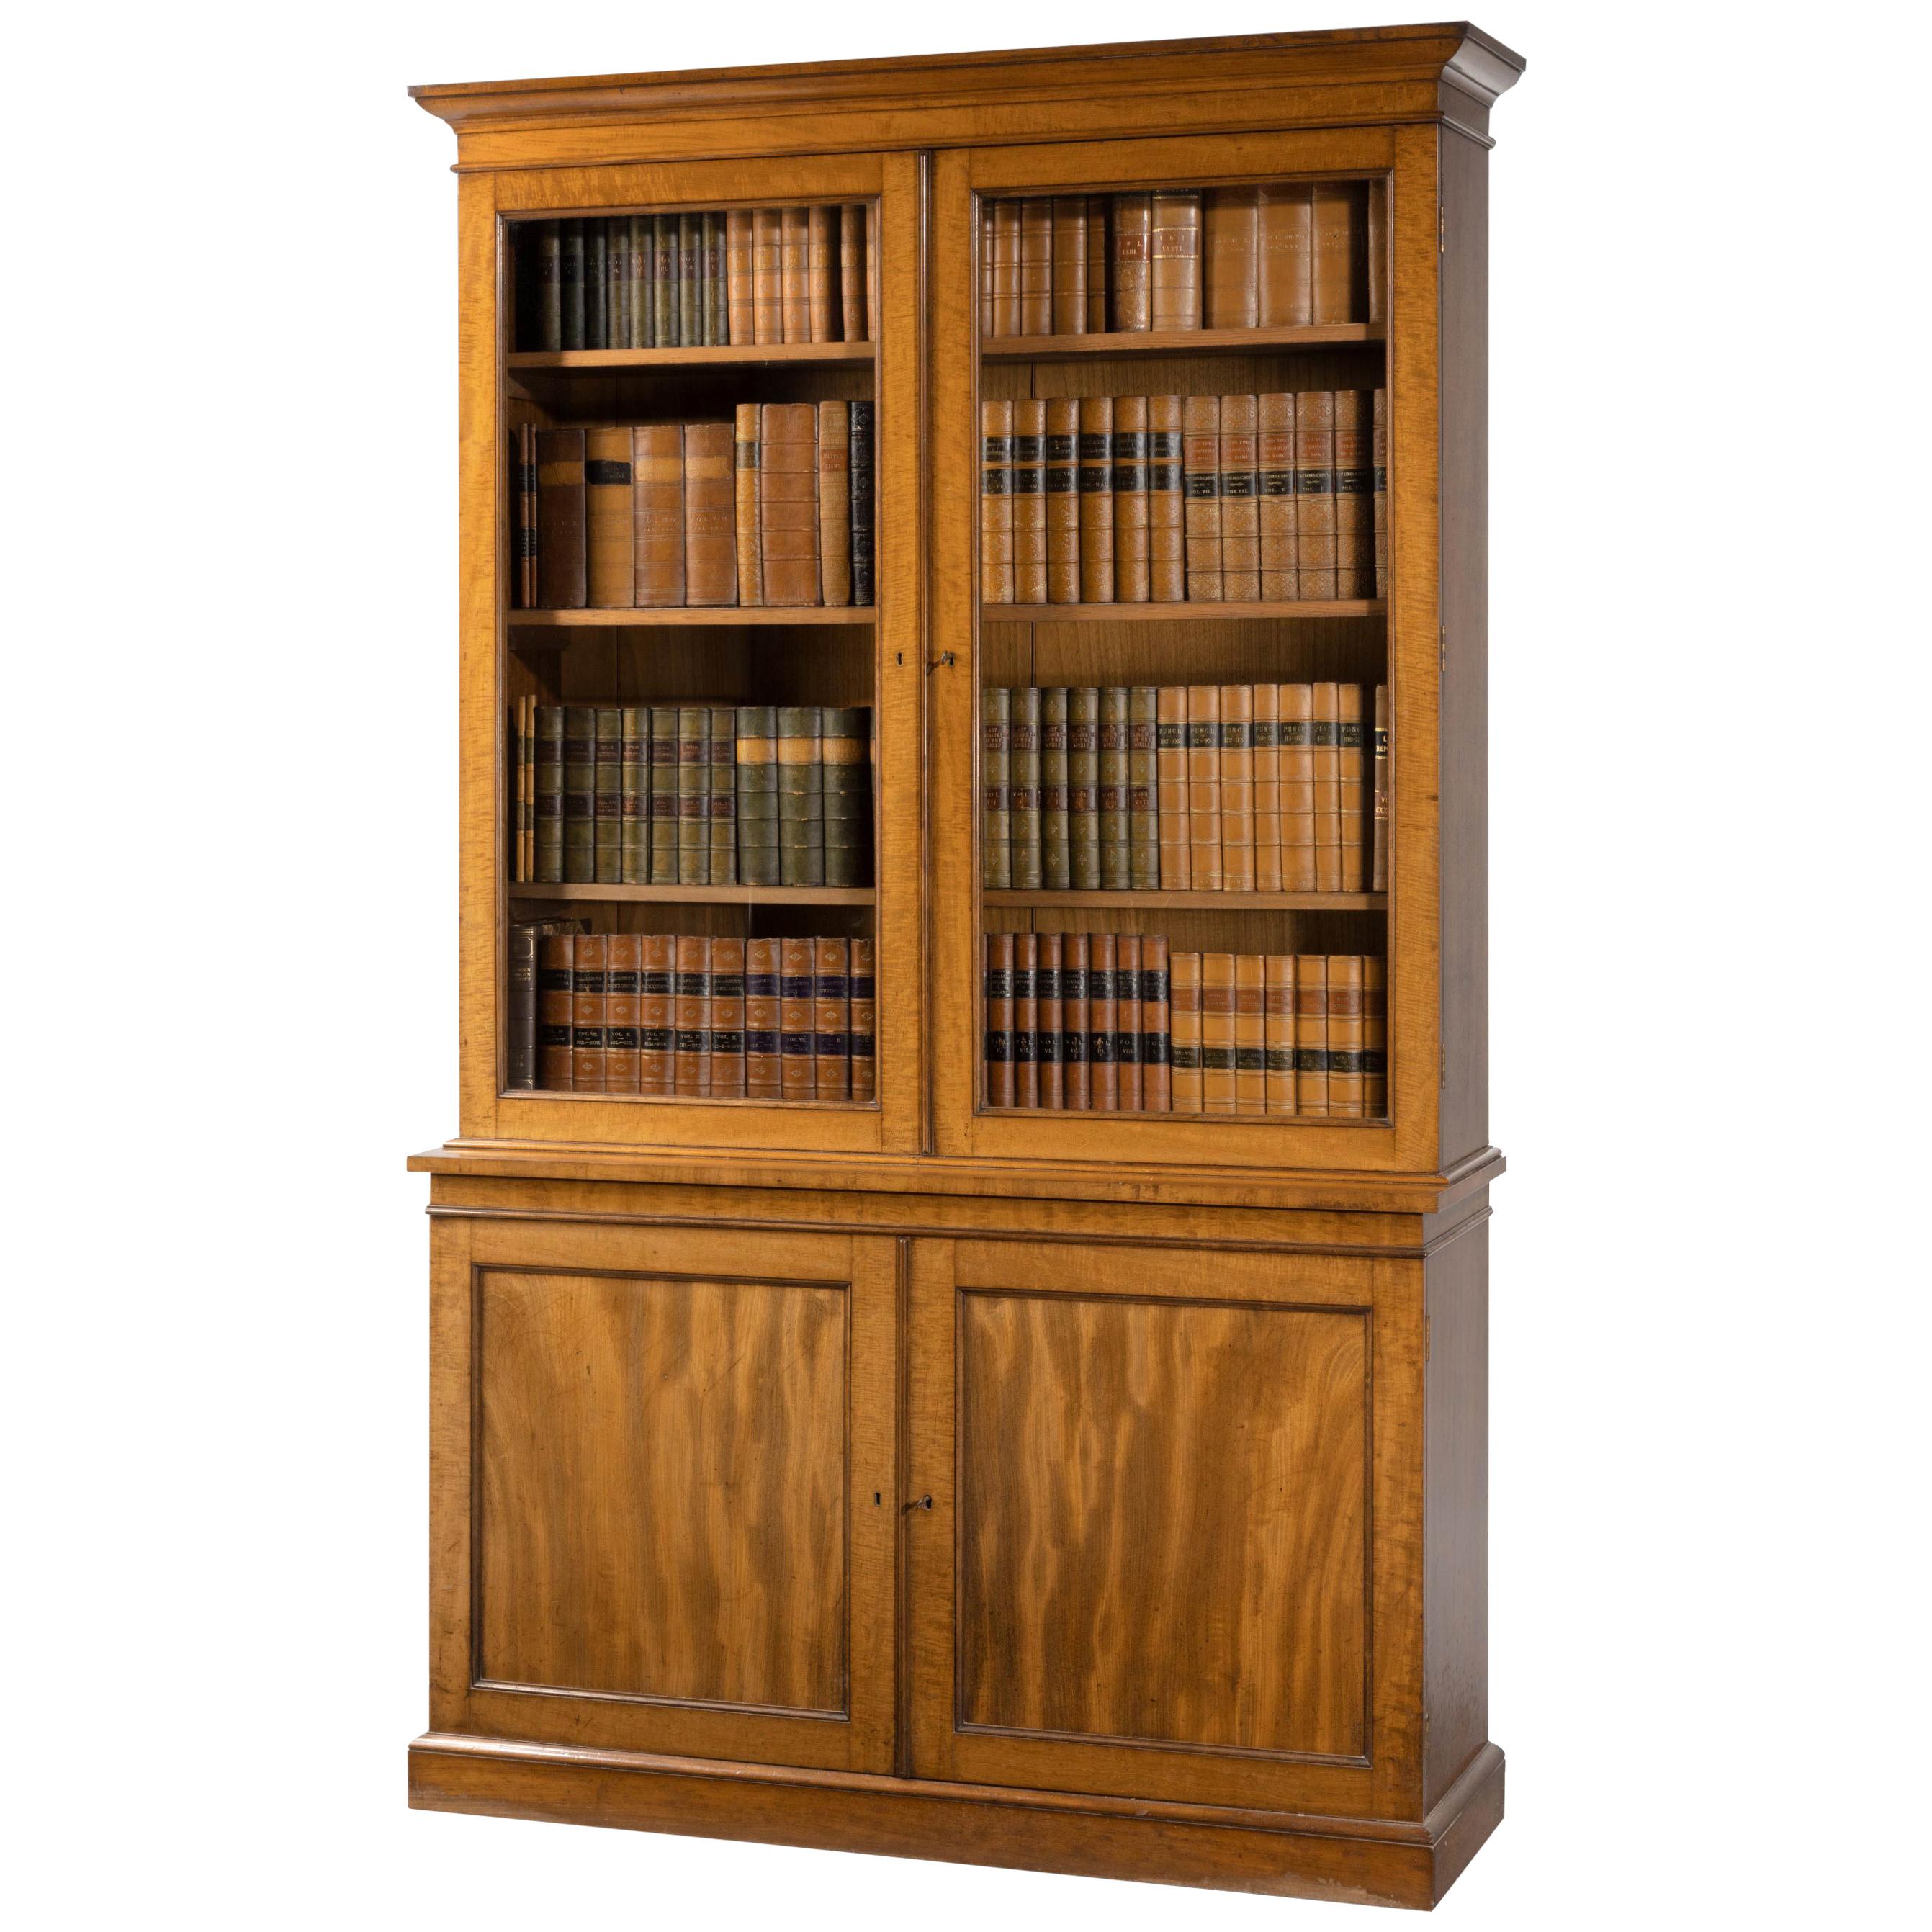 Very Good Early 19th Century Bookcase of Good Size